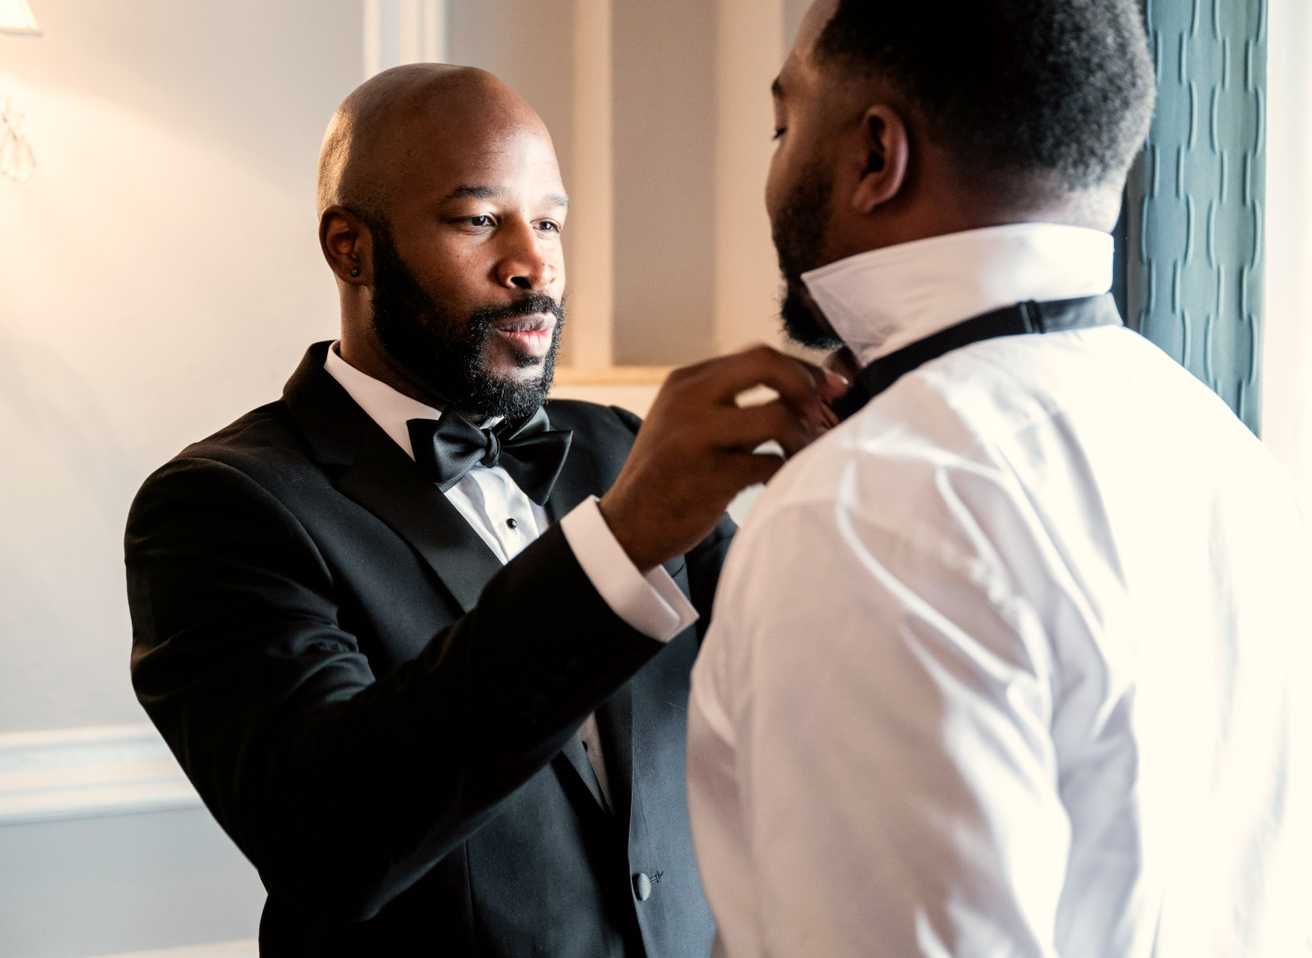 A man in a SuitShop tuxedo ties another man's bowtie while getting ready for a wedding.